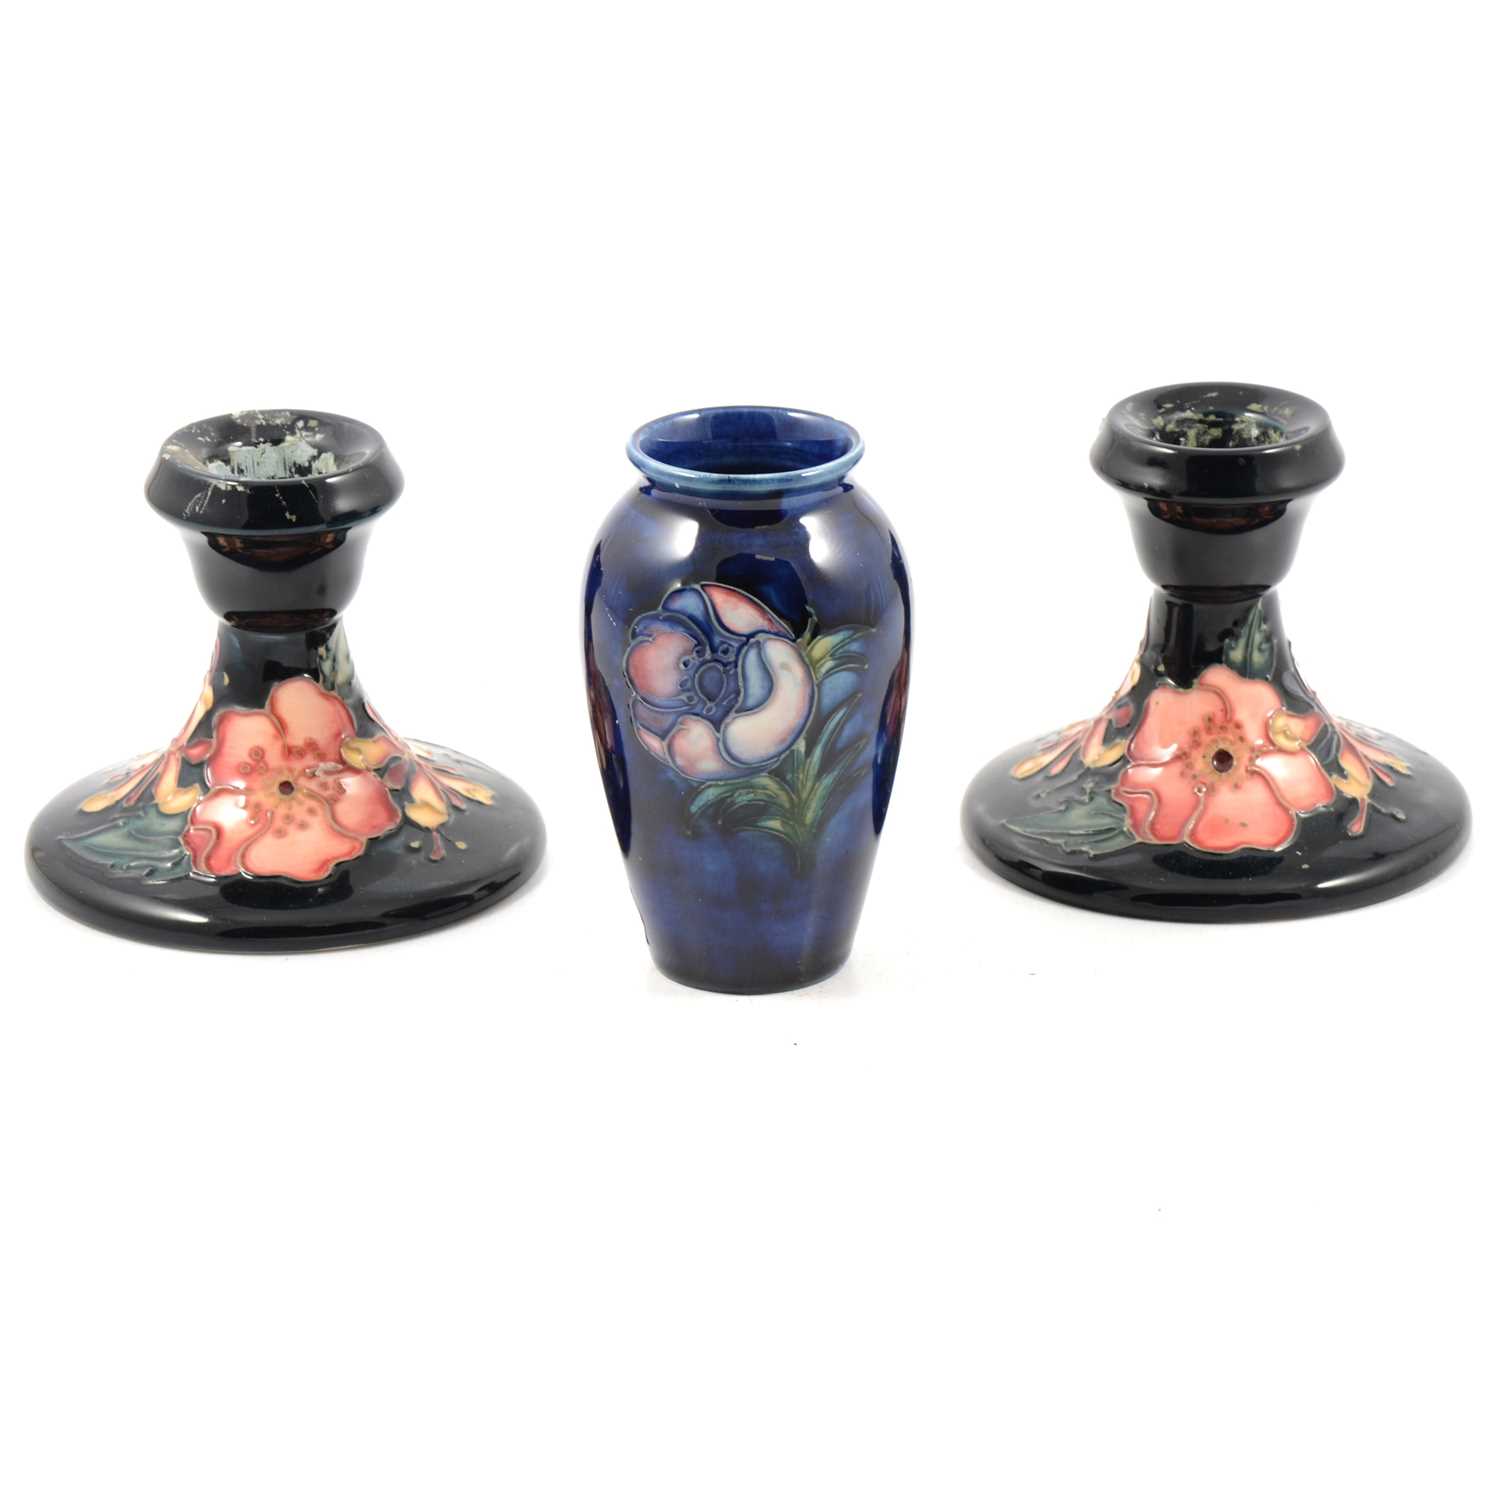 Lot 26 - A pair of Moorcroft Pottery dwarf candlesticks, 'Oberon' pattern, and a small vase, 'Poppy' pattern.